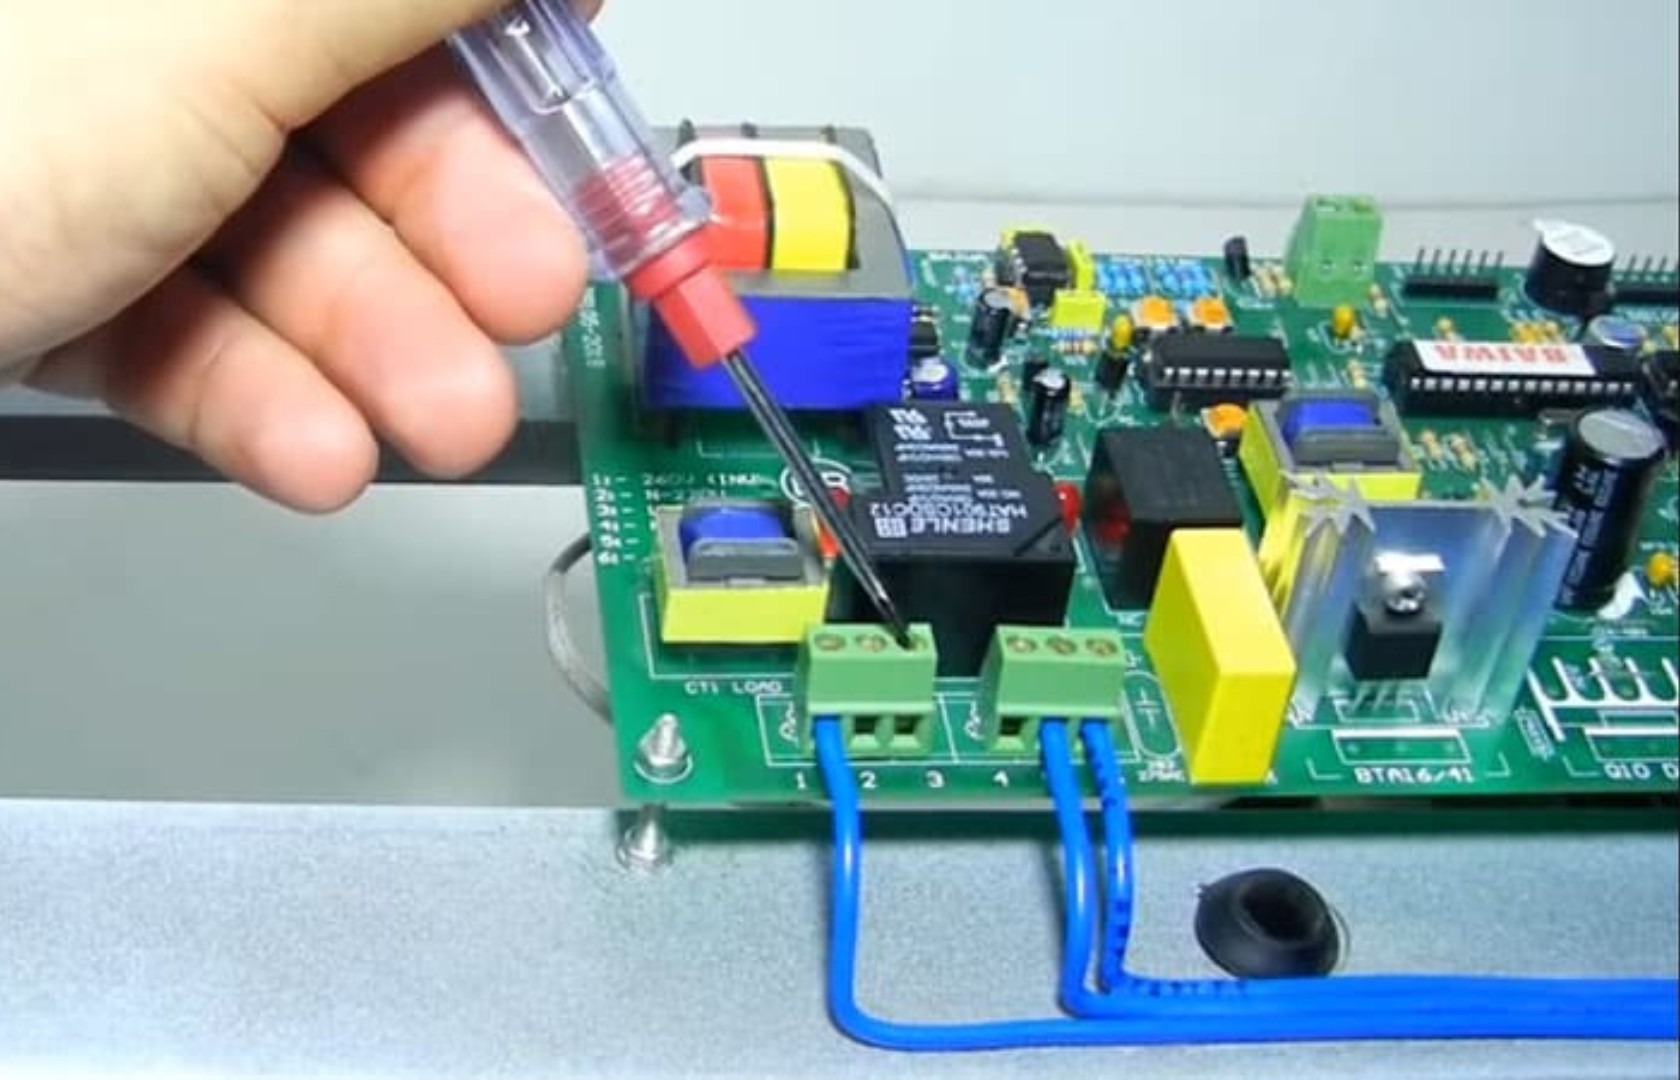 How to build a power inverter at home: Tutorial